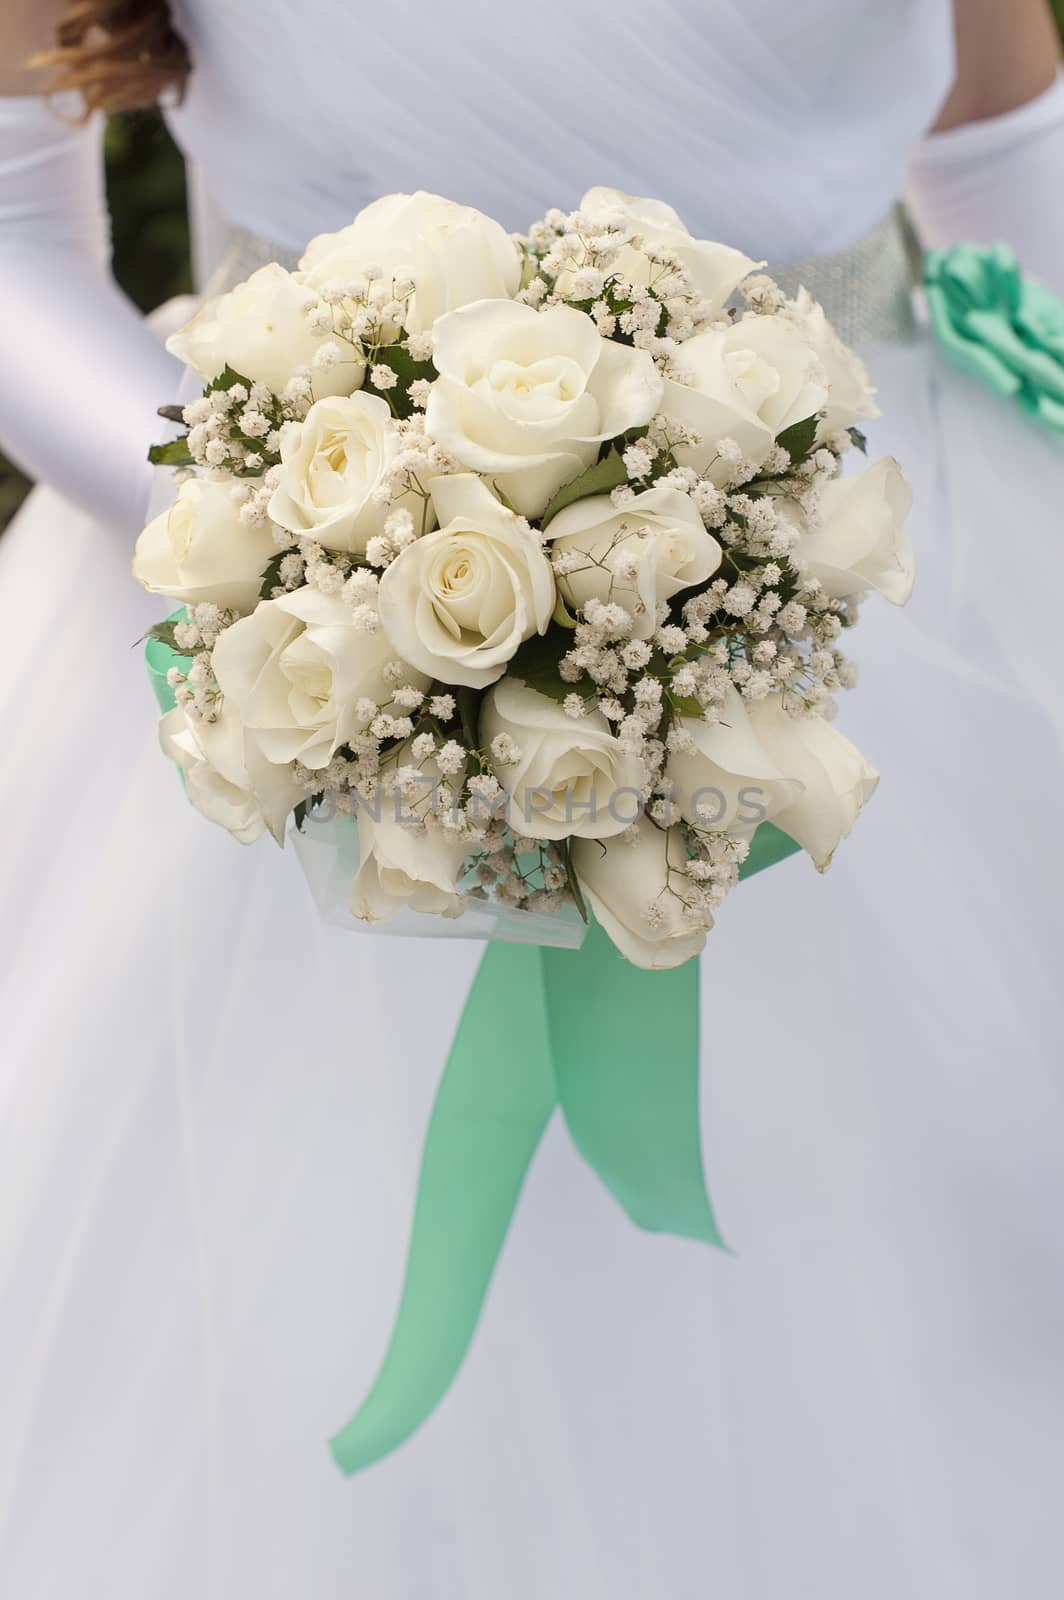 Bride Holding beautiful Bouquet of White Roses